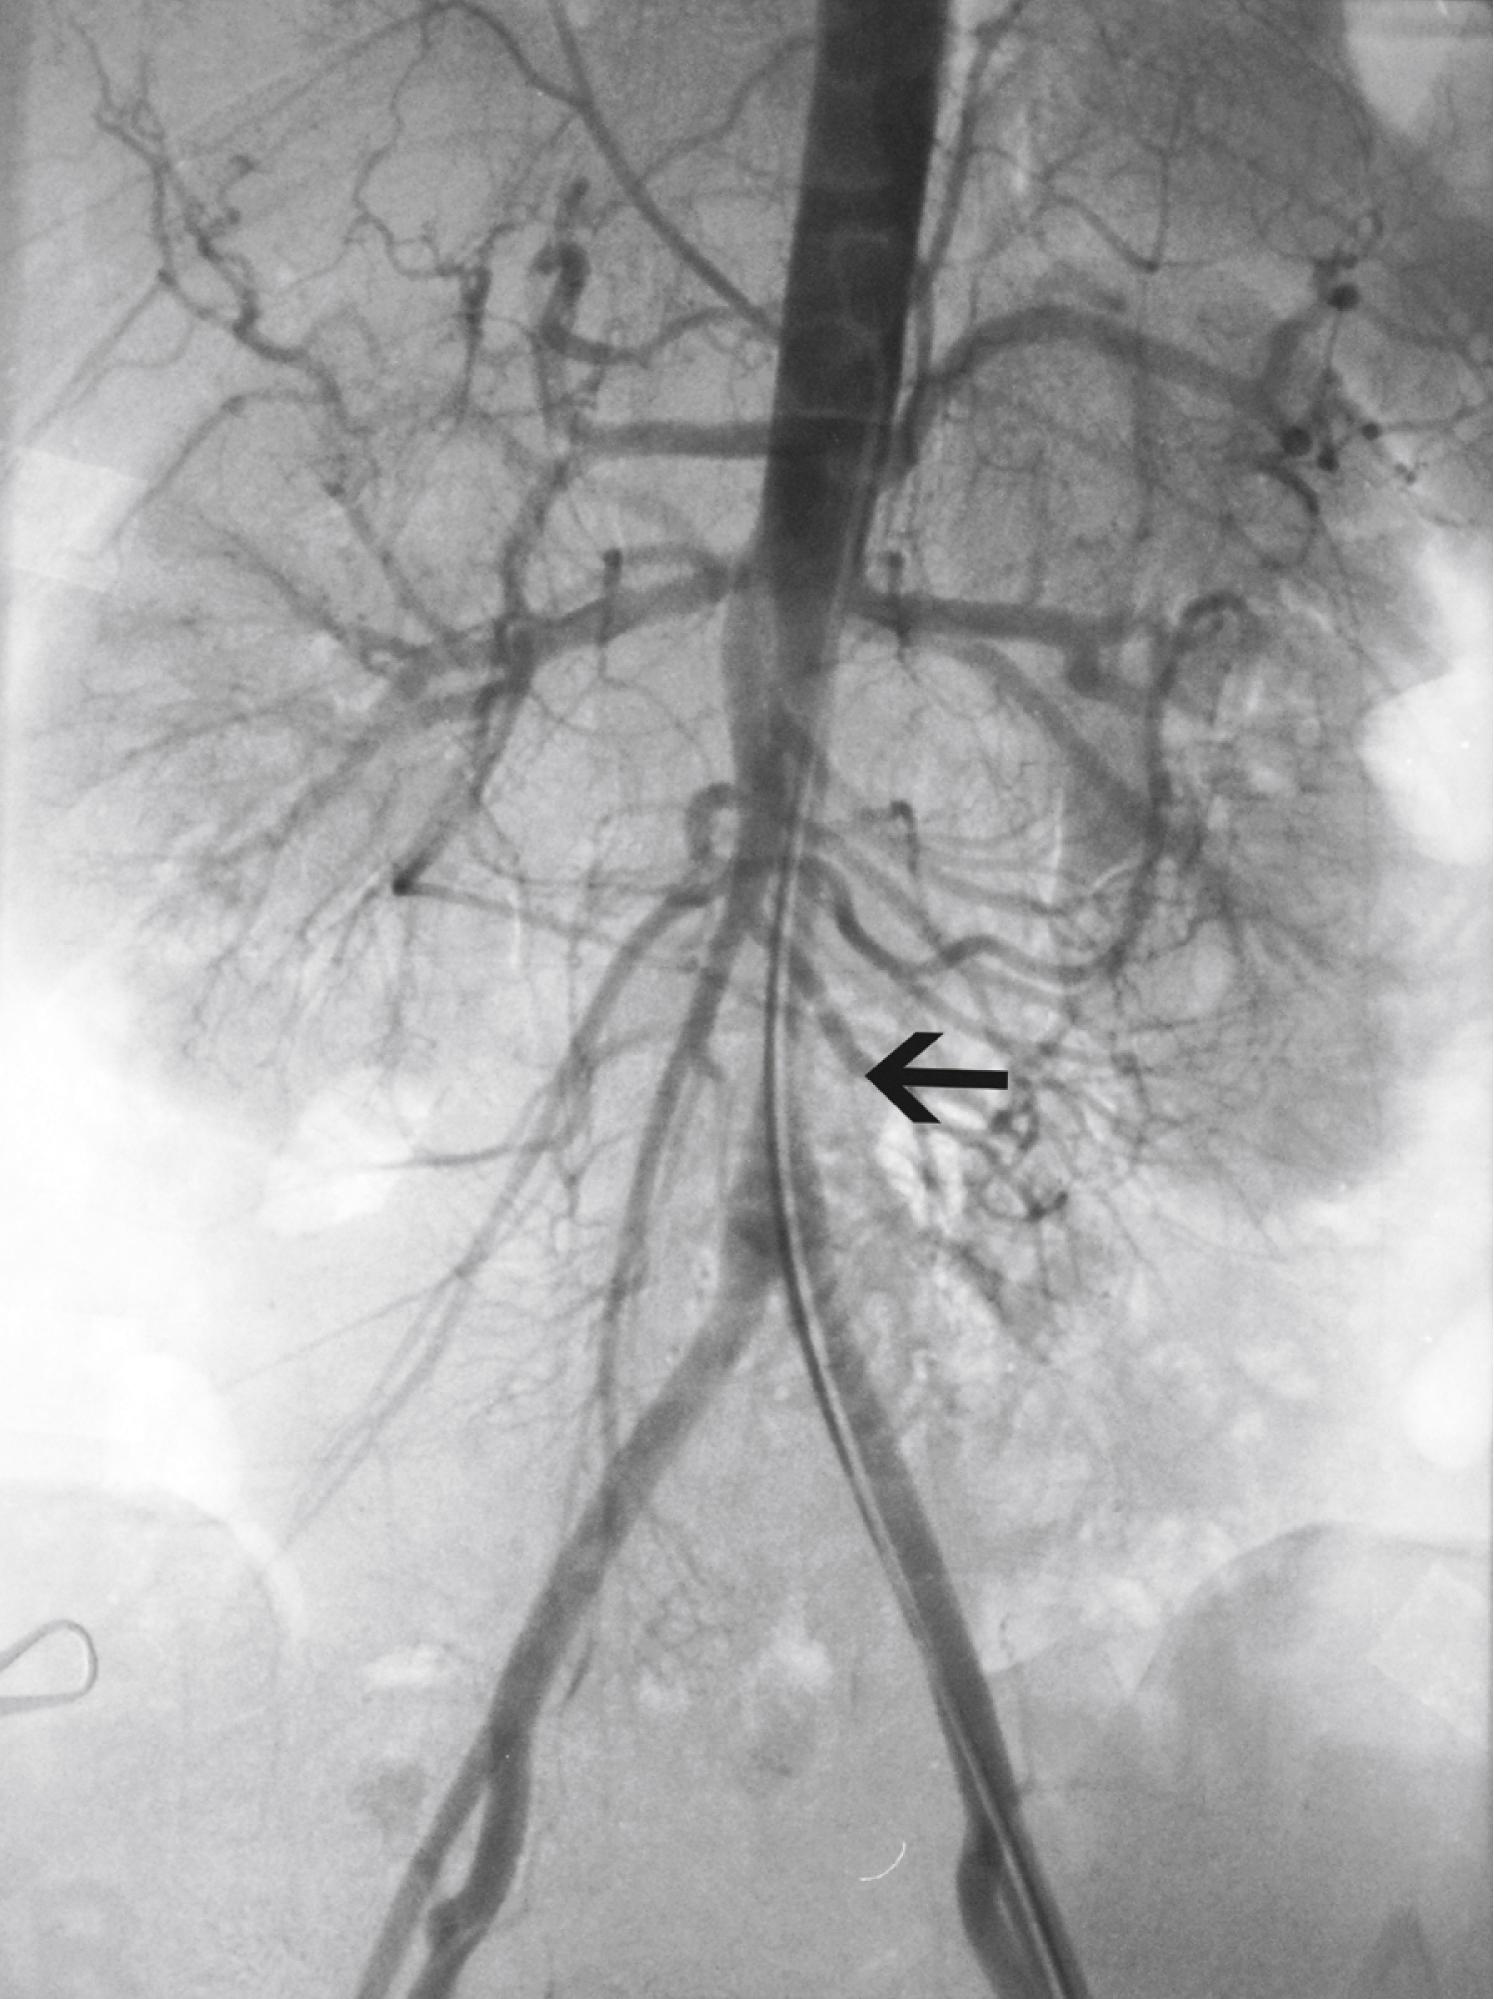 Figure 140.5, Abdominal aortogram of a 37-year-old hypertensive woman. Note the long, tapered stenosis of the infrarenal aorta (arrow) and sparing of the distal aorta and iliac arteries.